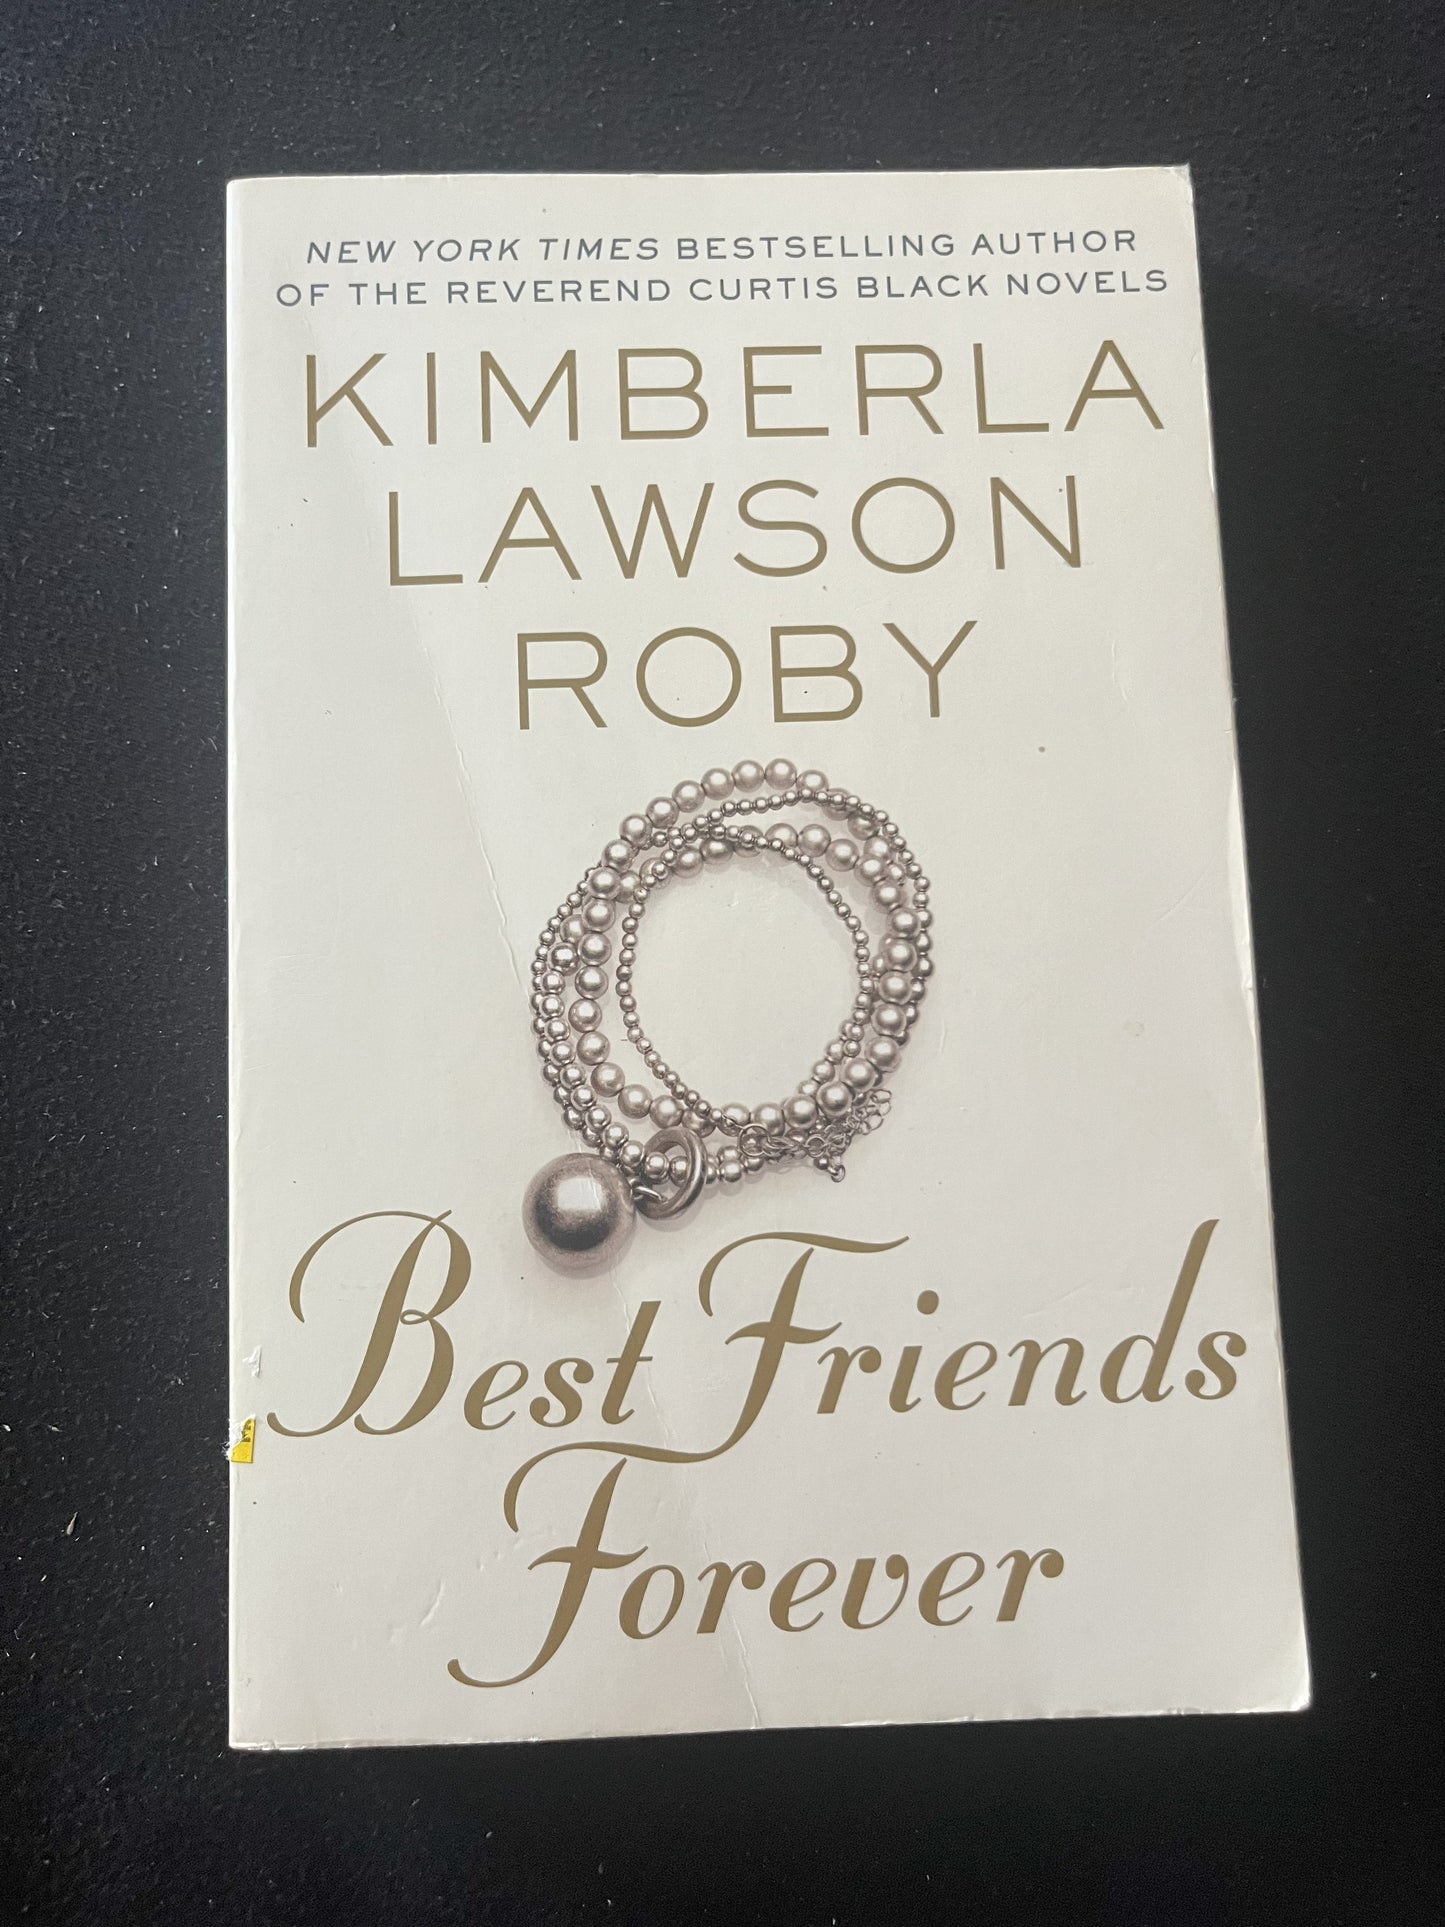 BEST FRIENDS FOREVER by Kimberla Lawson Roby